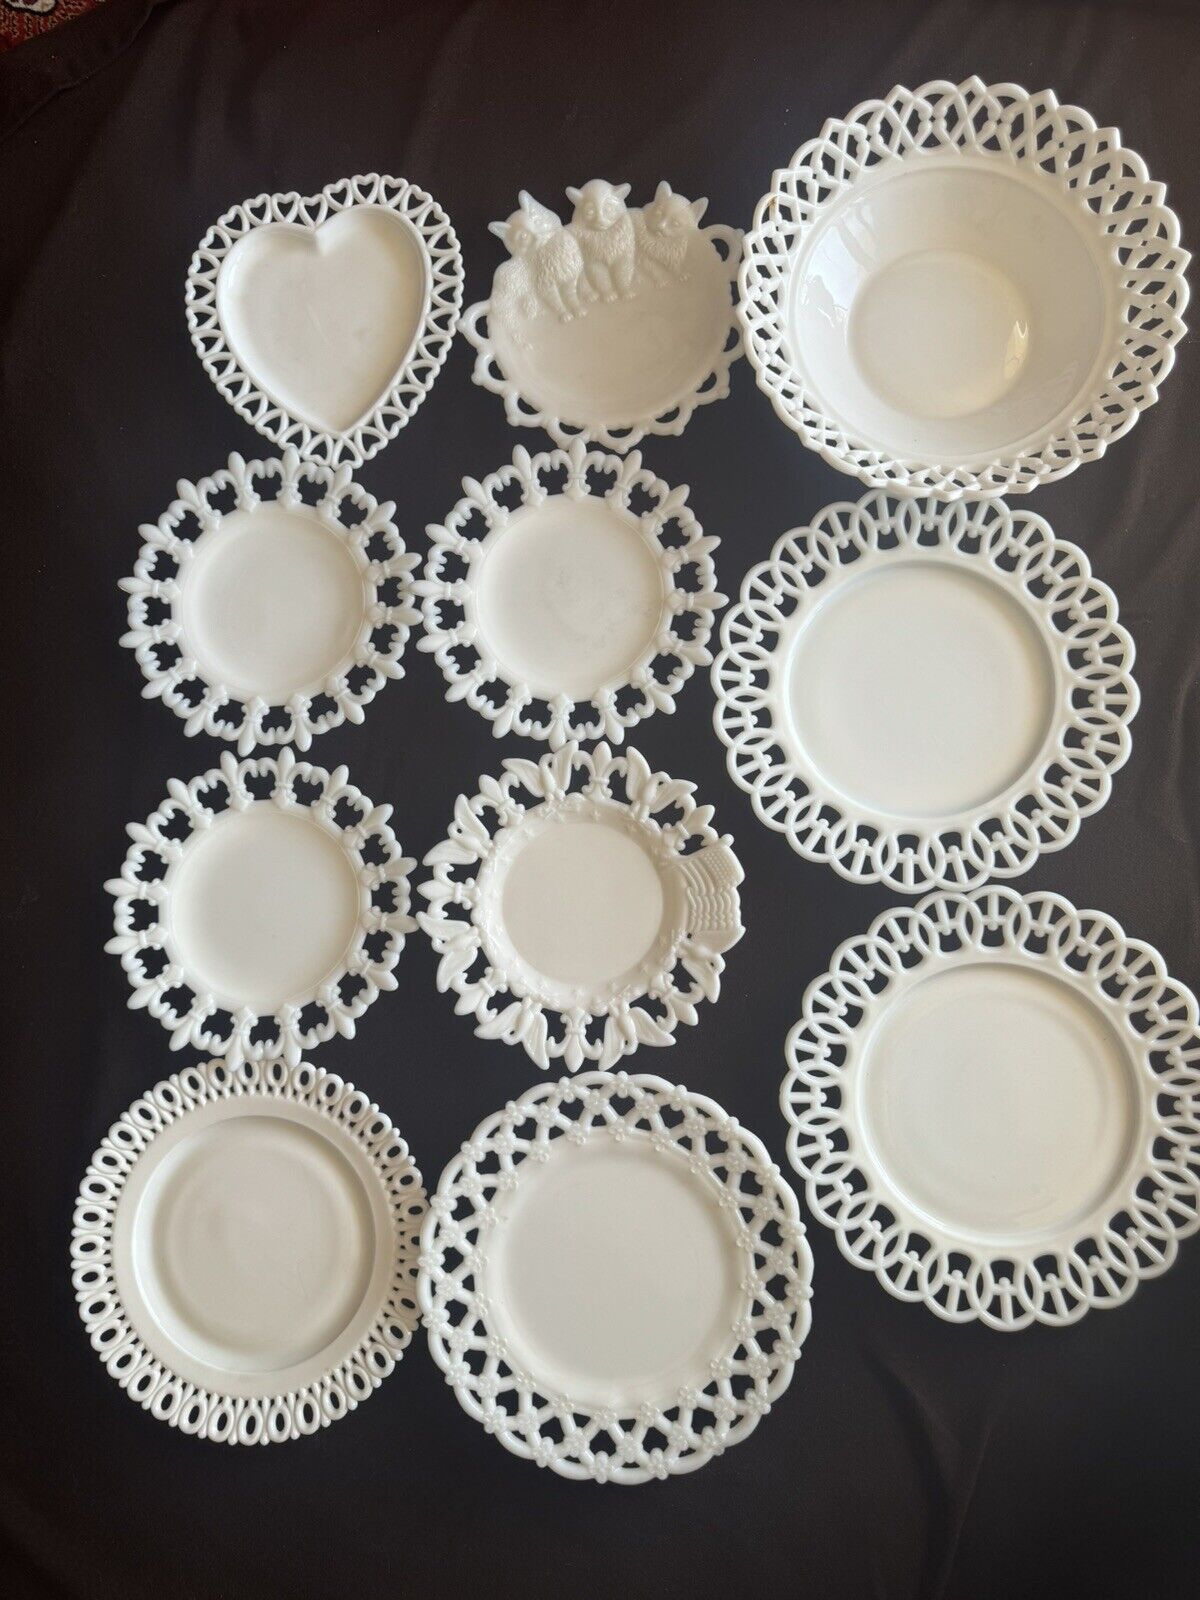 Antique Atterbury Glass Co. Milk Glass 11pc Mixed Plates And Bowl Set #5